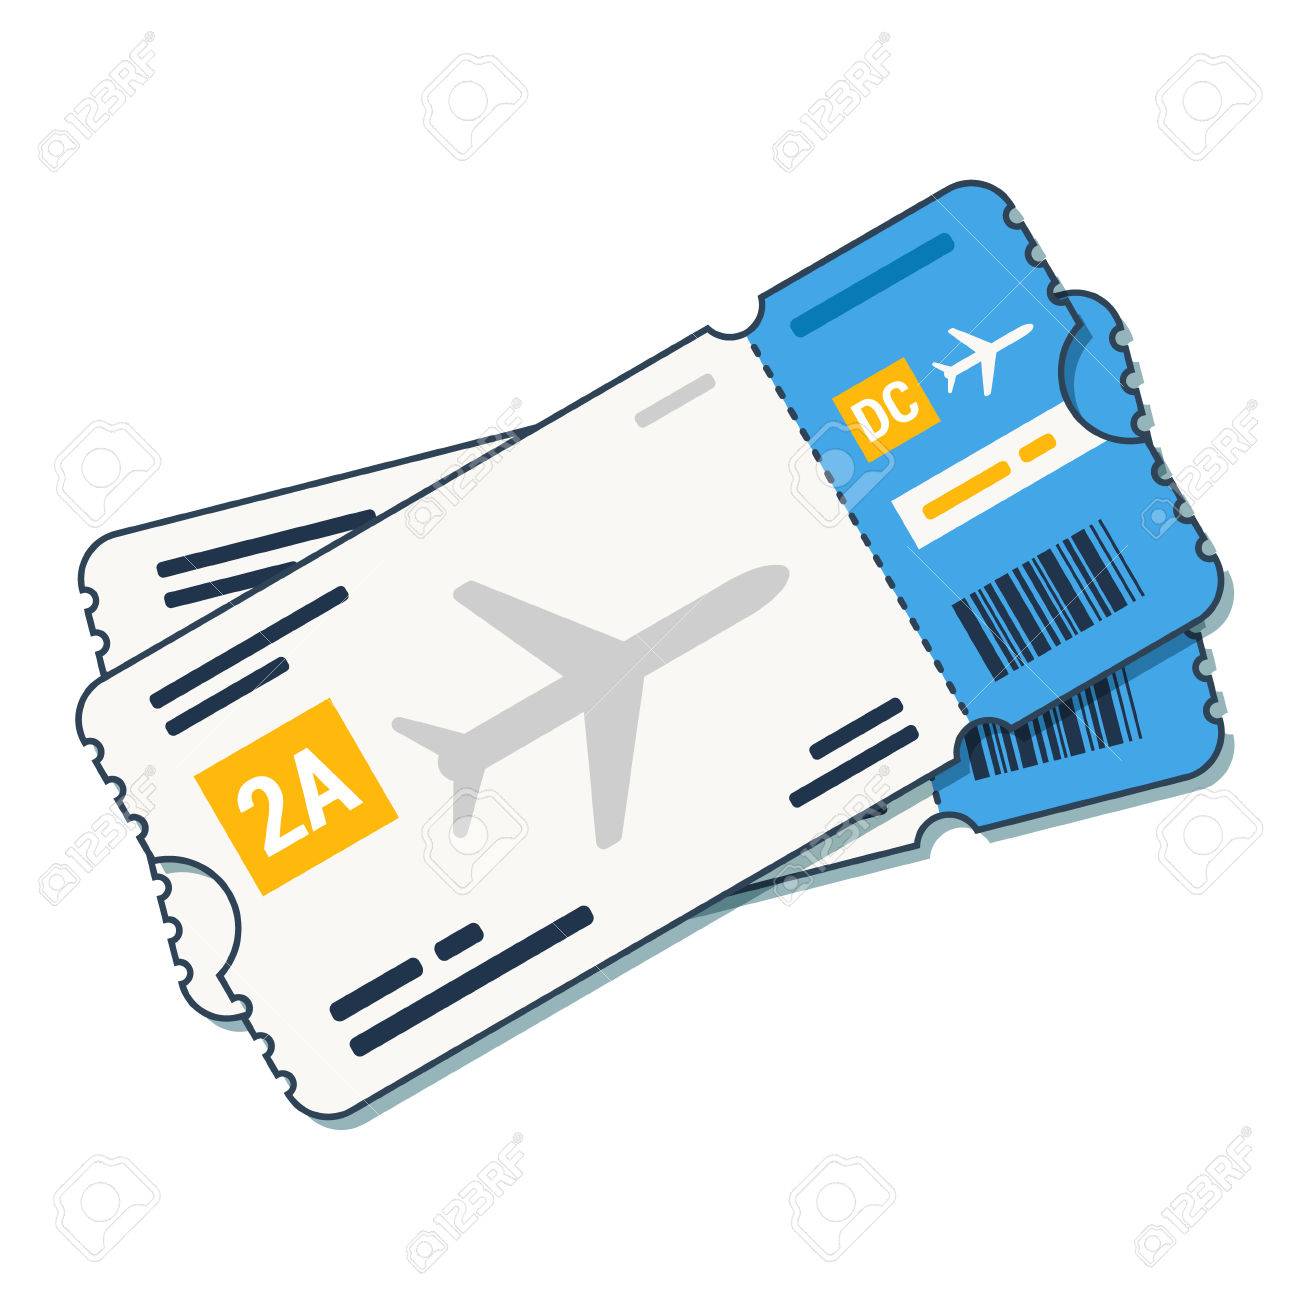 Airline tickets ,boarding pass icon Airline boarding pass.